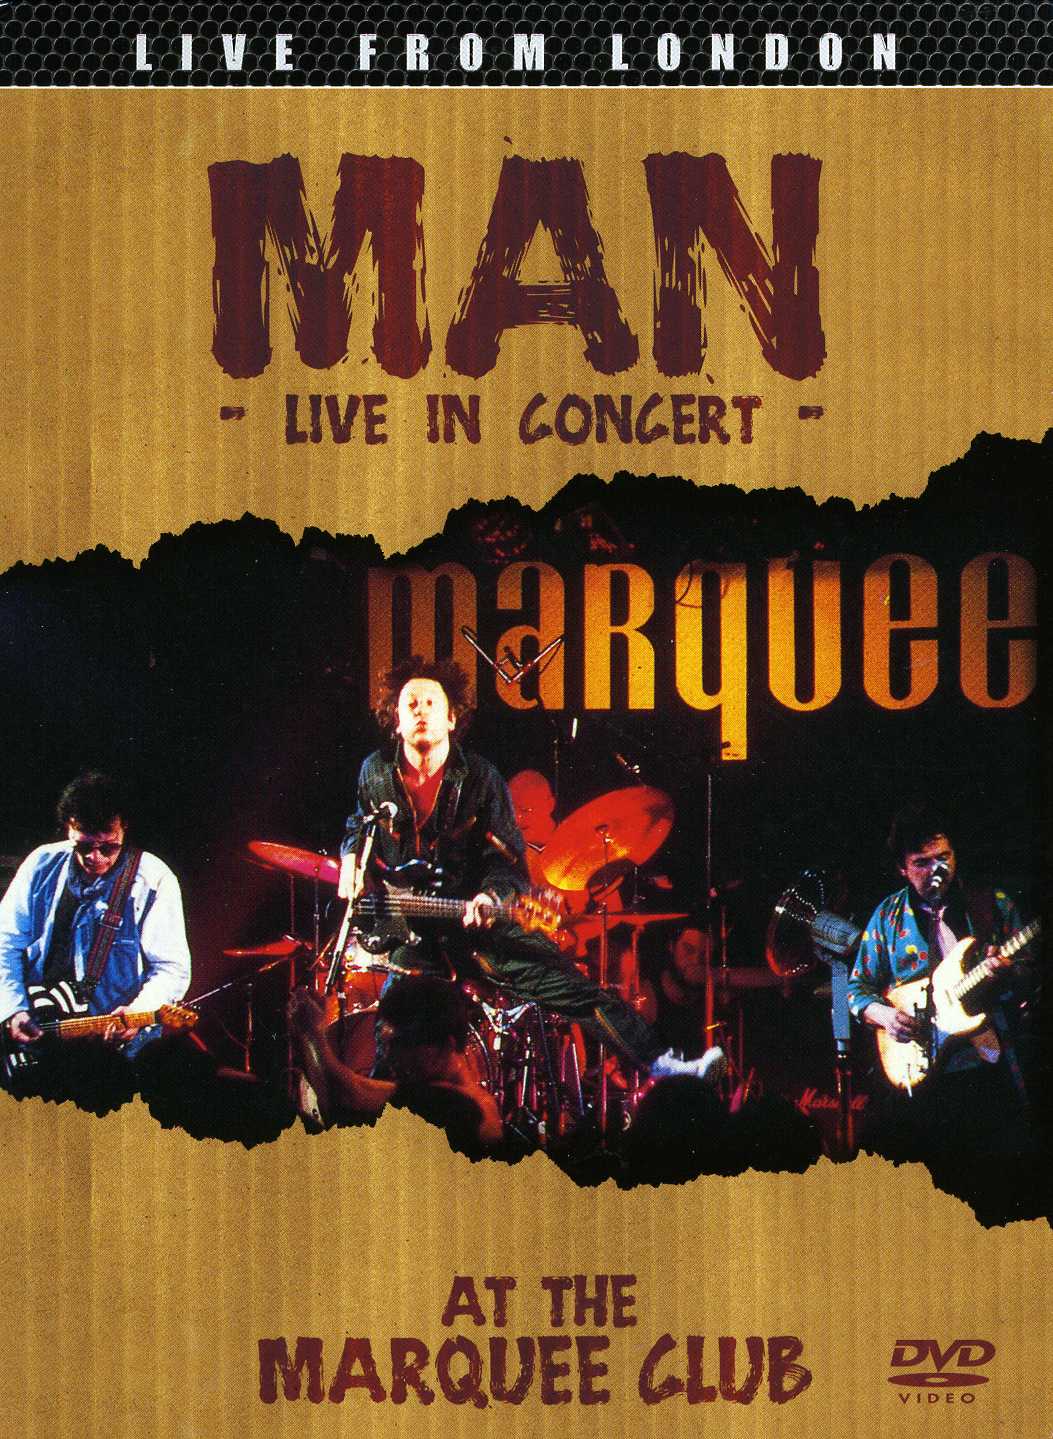 LIVE FROM LONDON: LIVE IN CONCERT AT THE MARQUEE